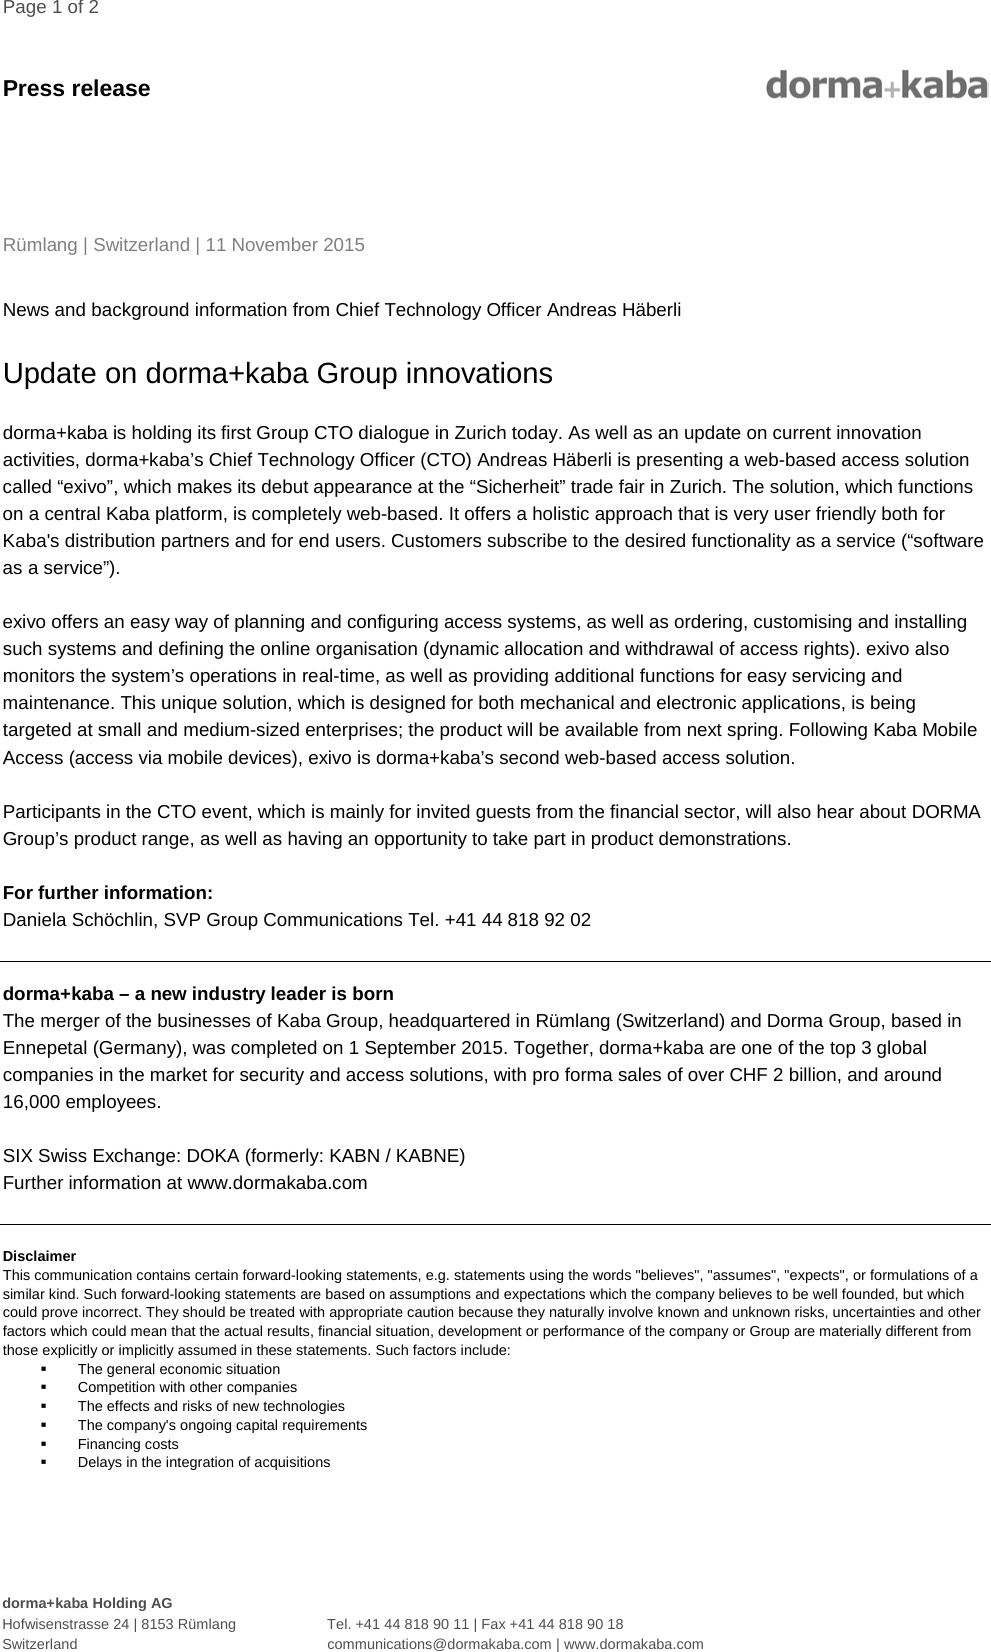 Page 1 of 2 - Kaba  11/11/2015 - Update On Dorma+kaba Group Innovationspdf, 29 KB 11-11-2015-update-on-dorma-kaba-group-innovations